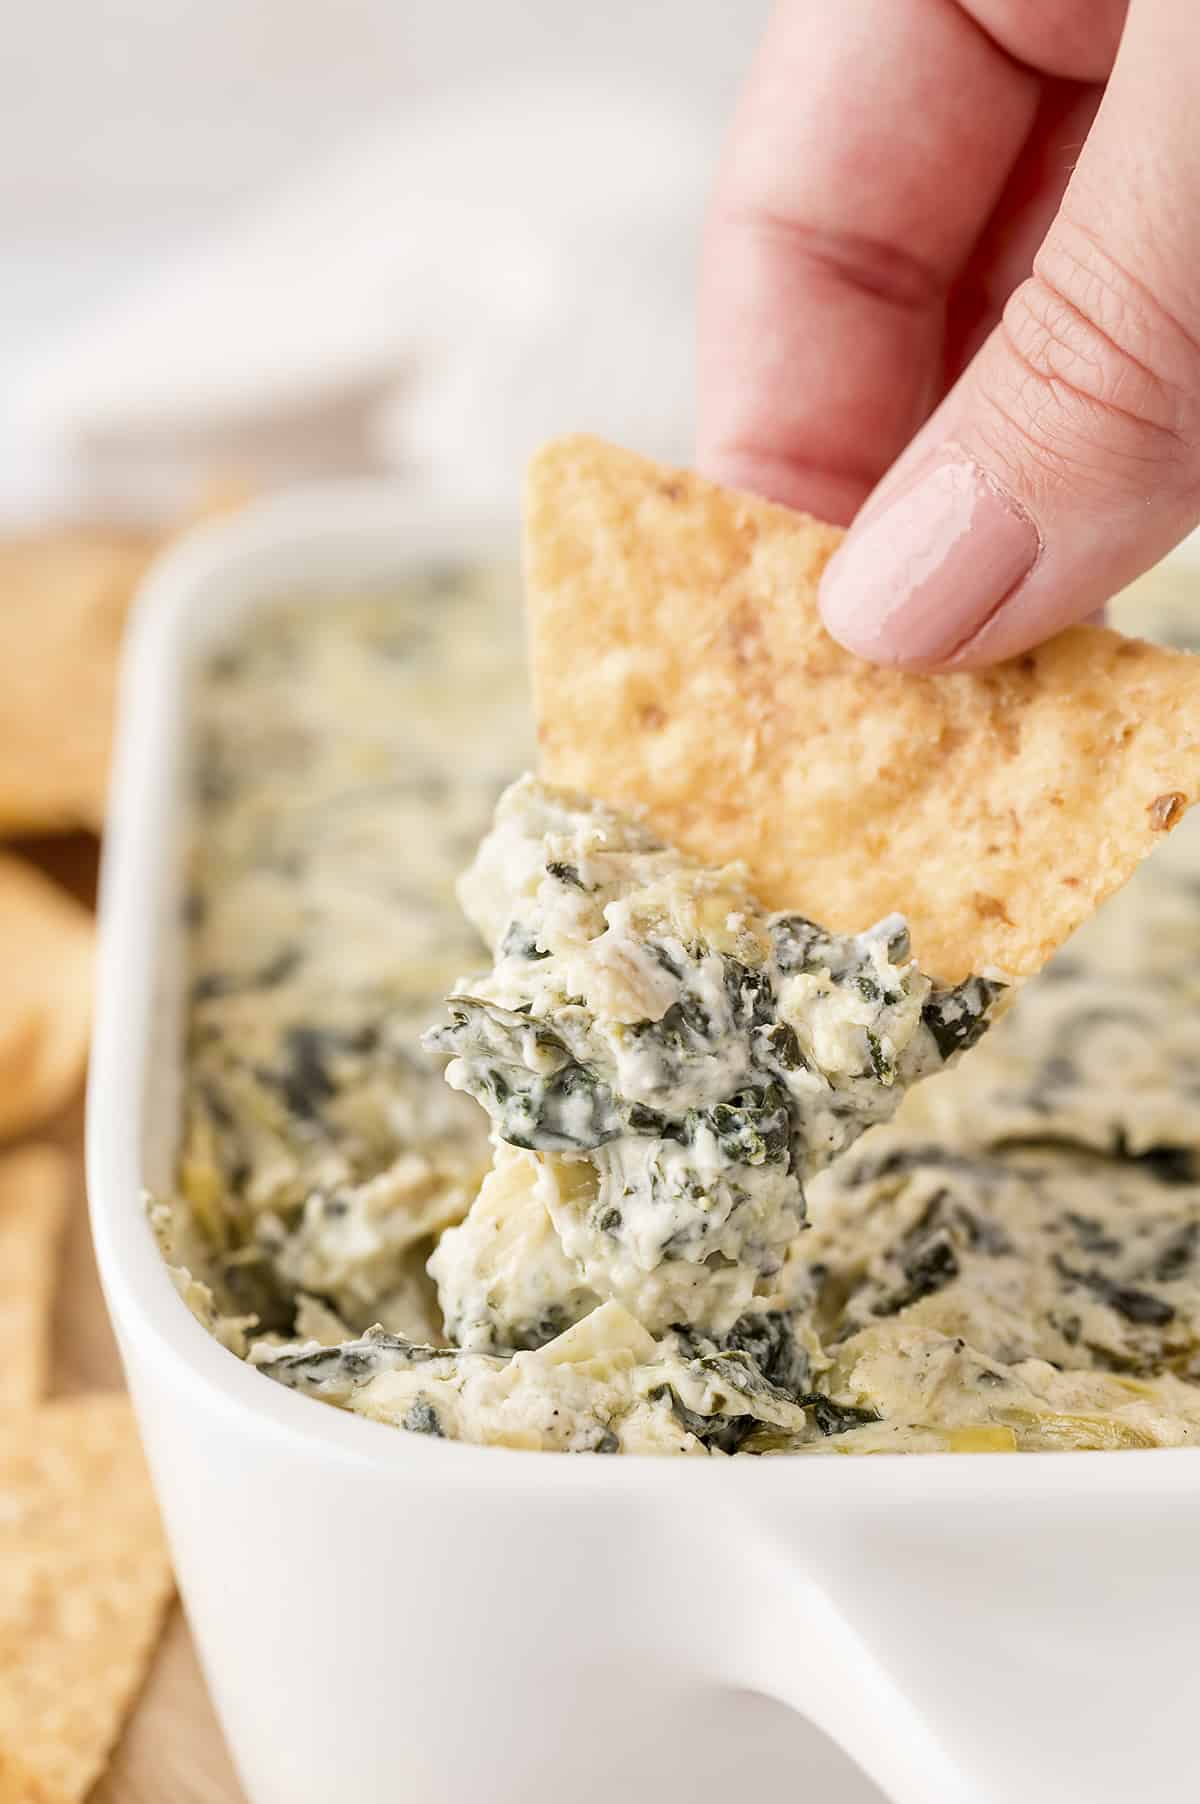 Hand dipping a tortilla chip into dish full of spinach artichoke dip.